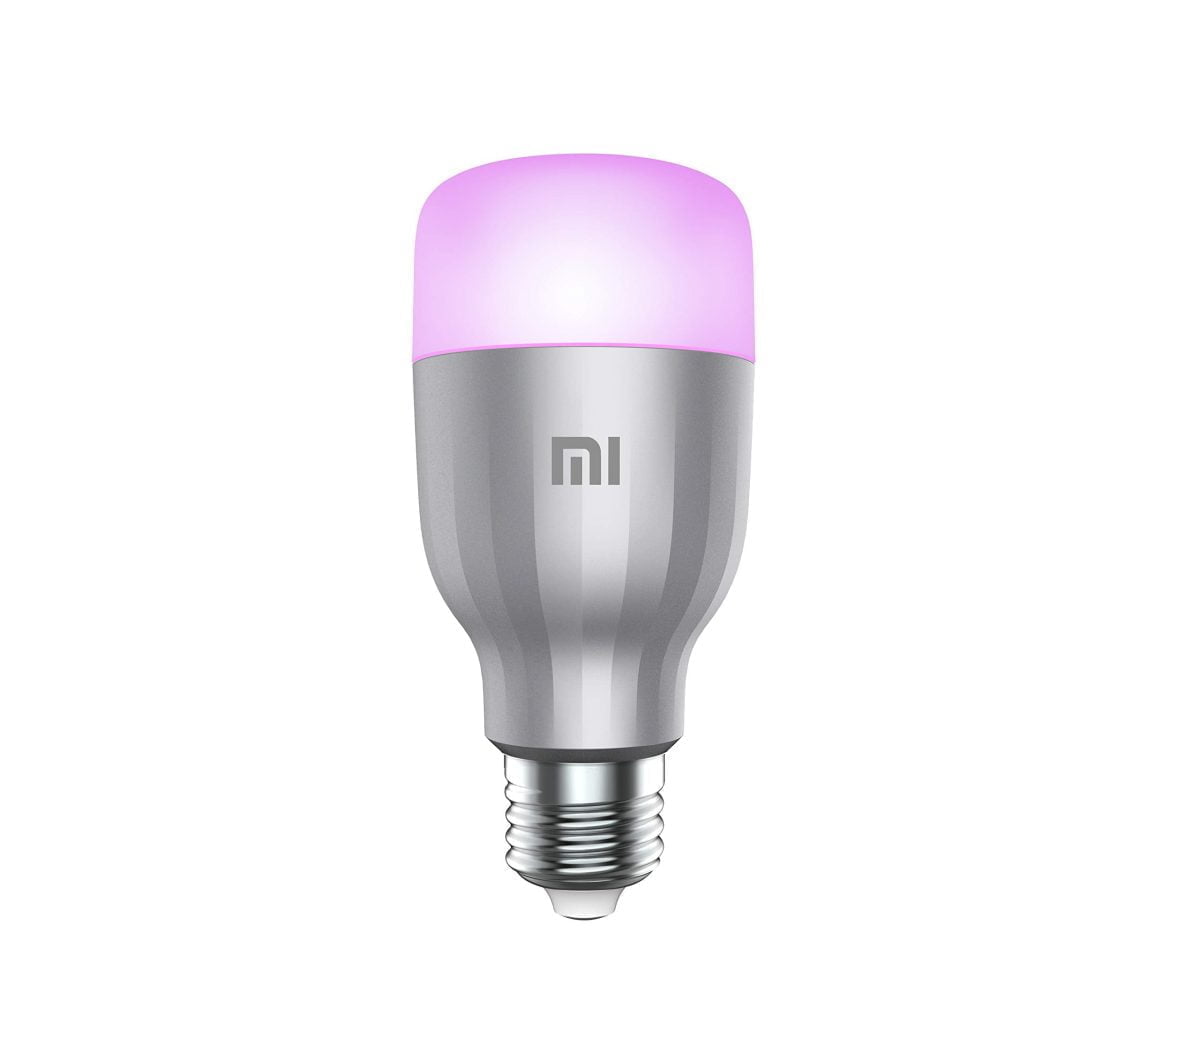 717Saokevql Xiaomi Xiaomi Mi Smart Led Bulb Essential(White And Color) Wifi Remote Control Smart Light Work With Alexa And Google Assistant, Voice Control, Wifi Connection, Adjustable Color Temperature, Scheduled On/Off, Smart App Control Xiaomi Mi Led Xiaomi Mi Led Smart Bulb Essential Bulb (White And Color)(10W)